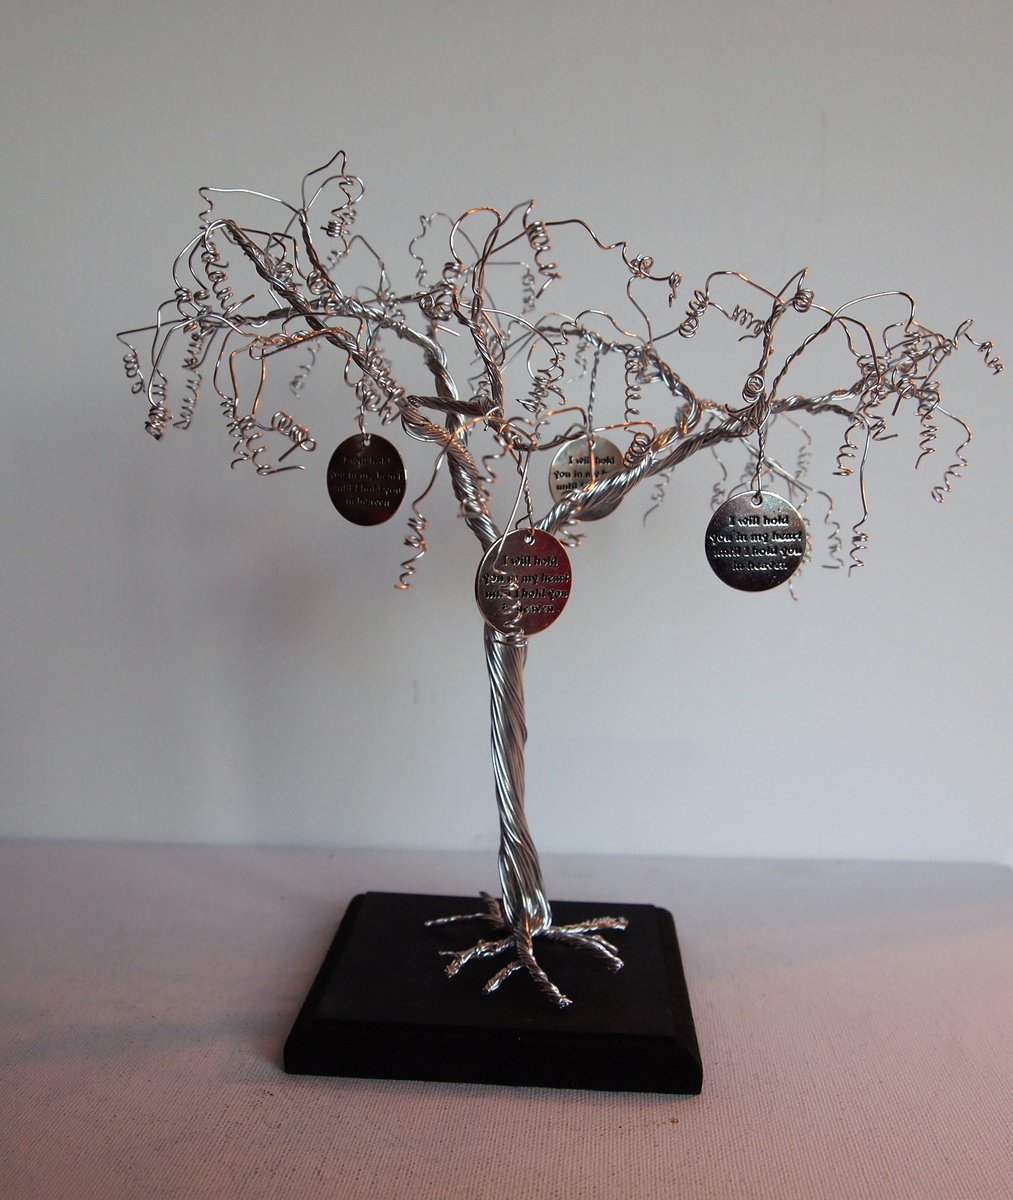 Silver wire, remembrance tree sculpture by Steph Morgan